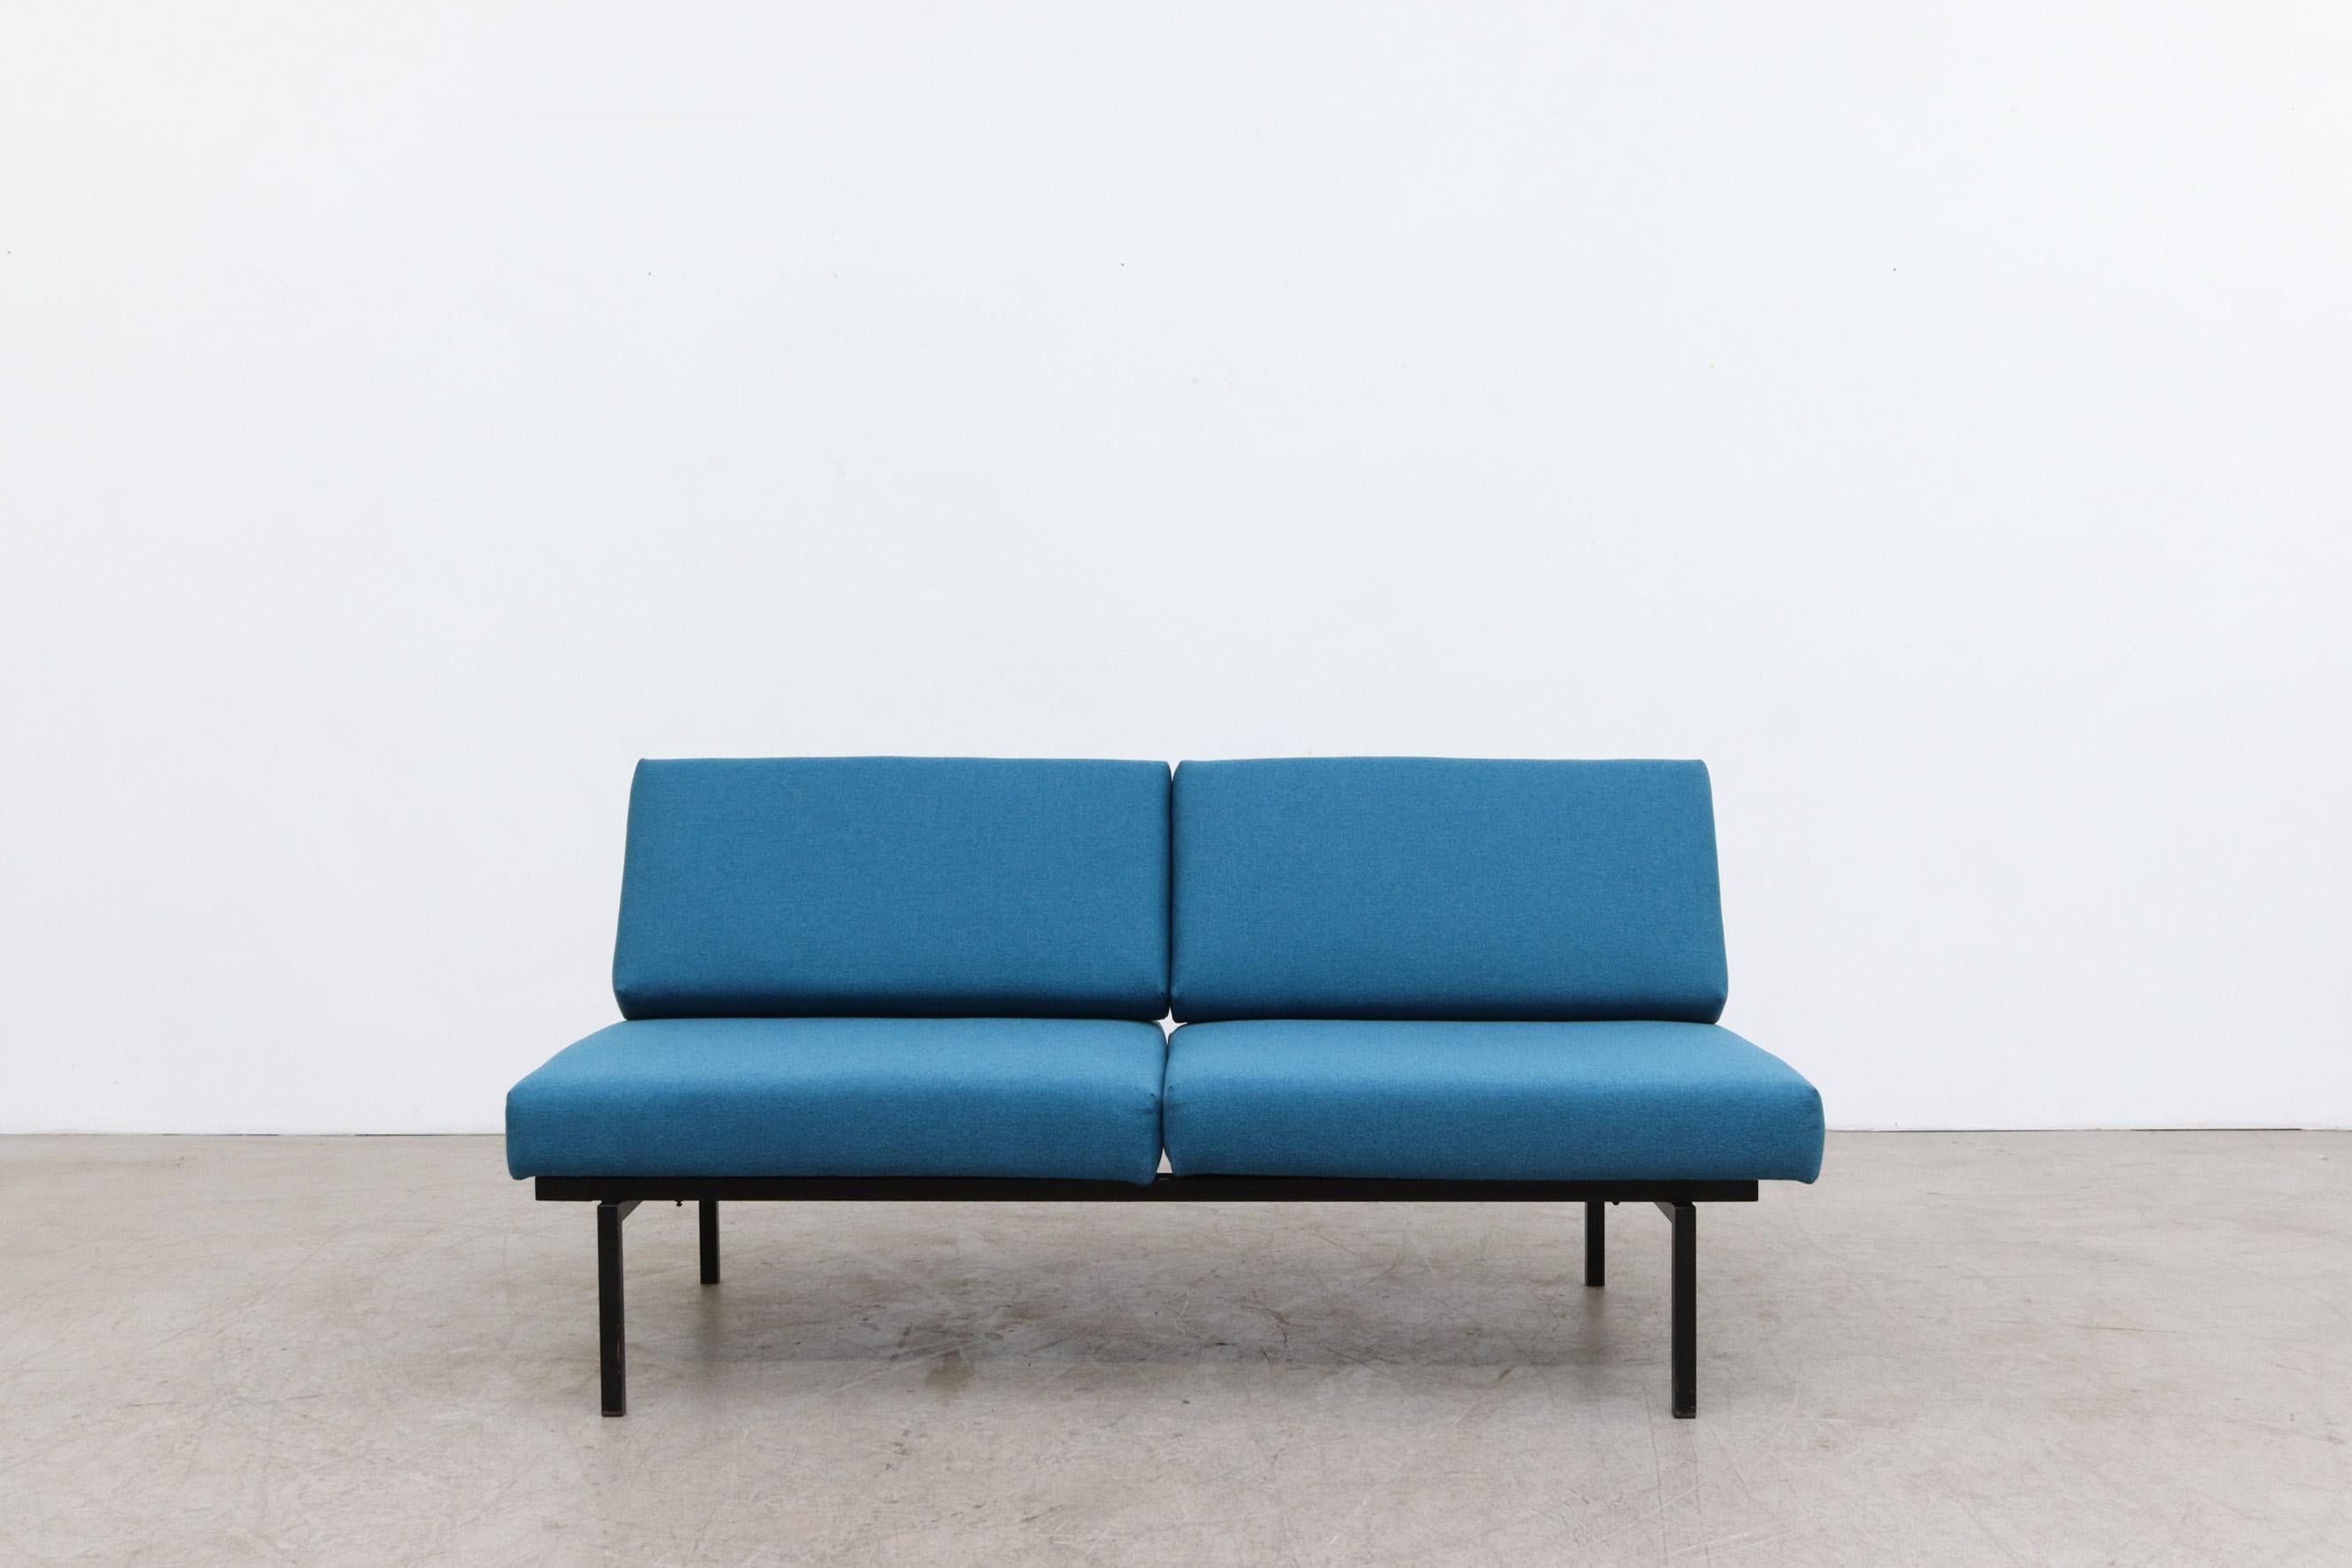 Coen de Vries for Pilastro Convertible sleeper loveseat with new azure blue cushions. The back frame flips over and the bottom frame holds Interior bars that extend out from under loveseat to make bed. The frame is in original condition with visible